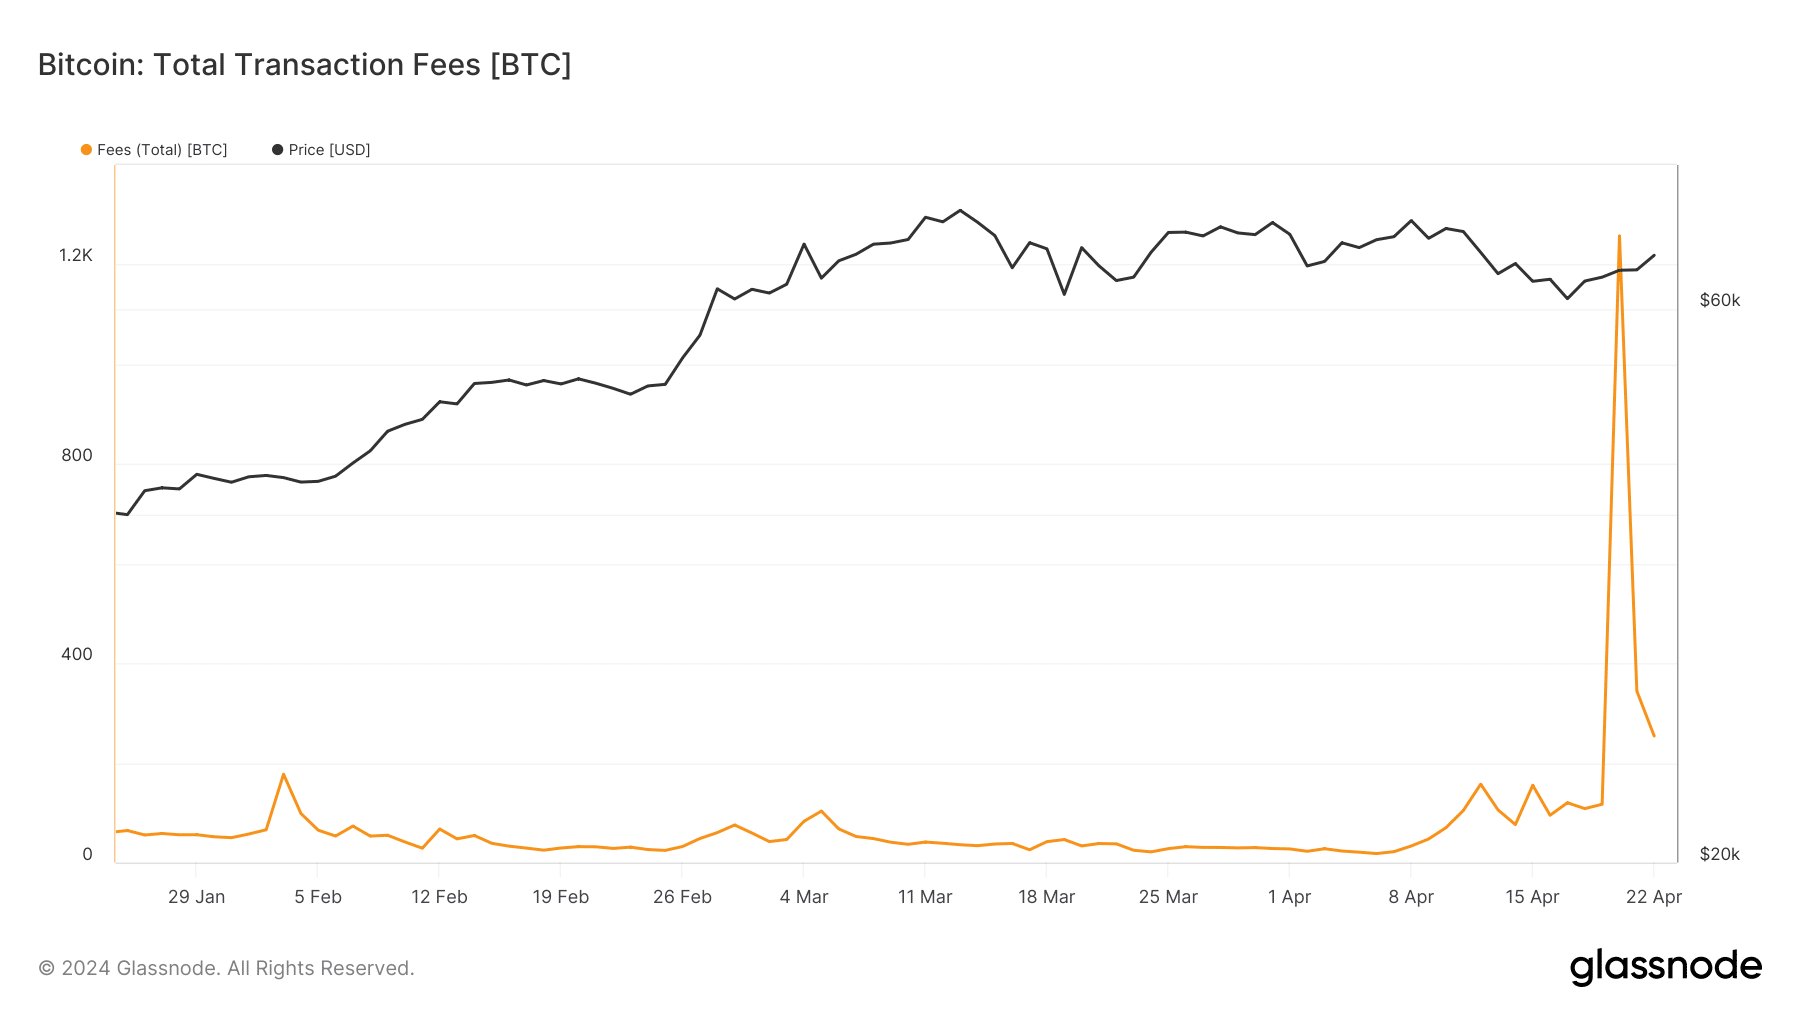 Bitcoin fees crashed after it skyrocketed earlier